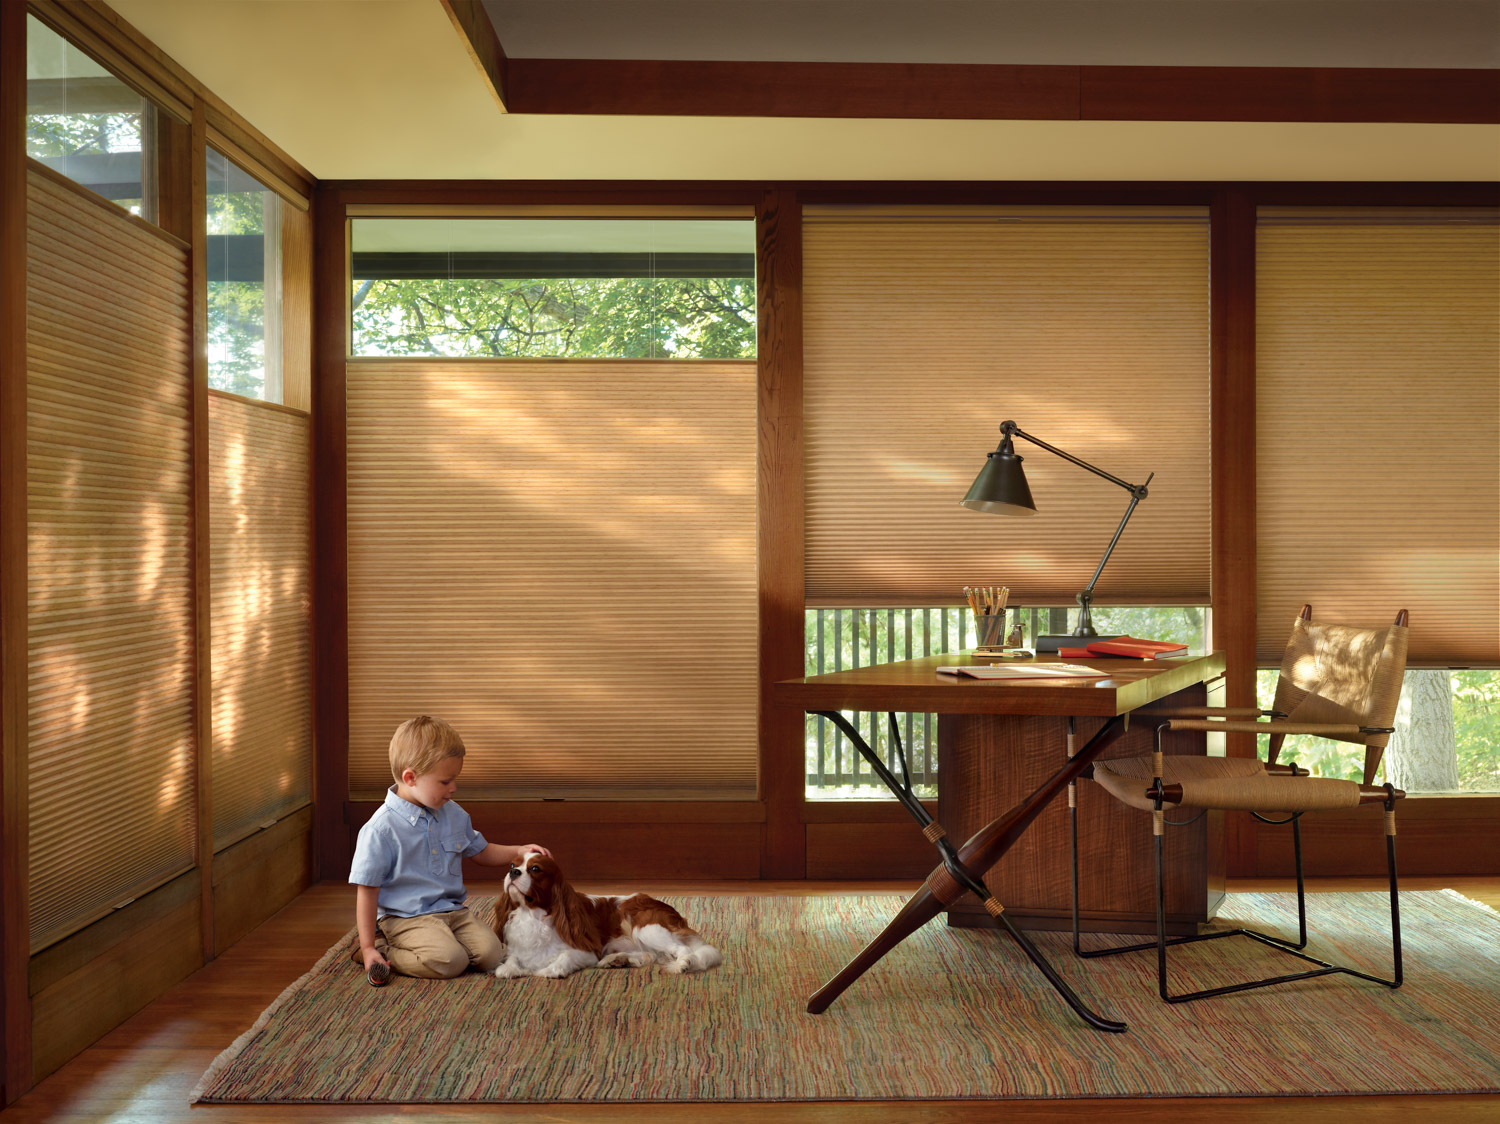 A boy and a dog sitting by a window, enjoying the view. Hunter Douglas Duette® Honeycomb Shades add elegance to the scene.